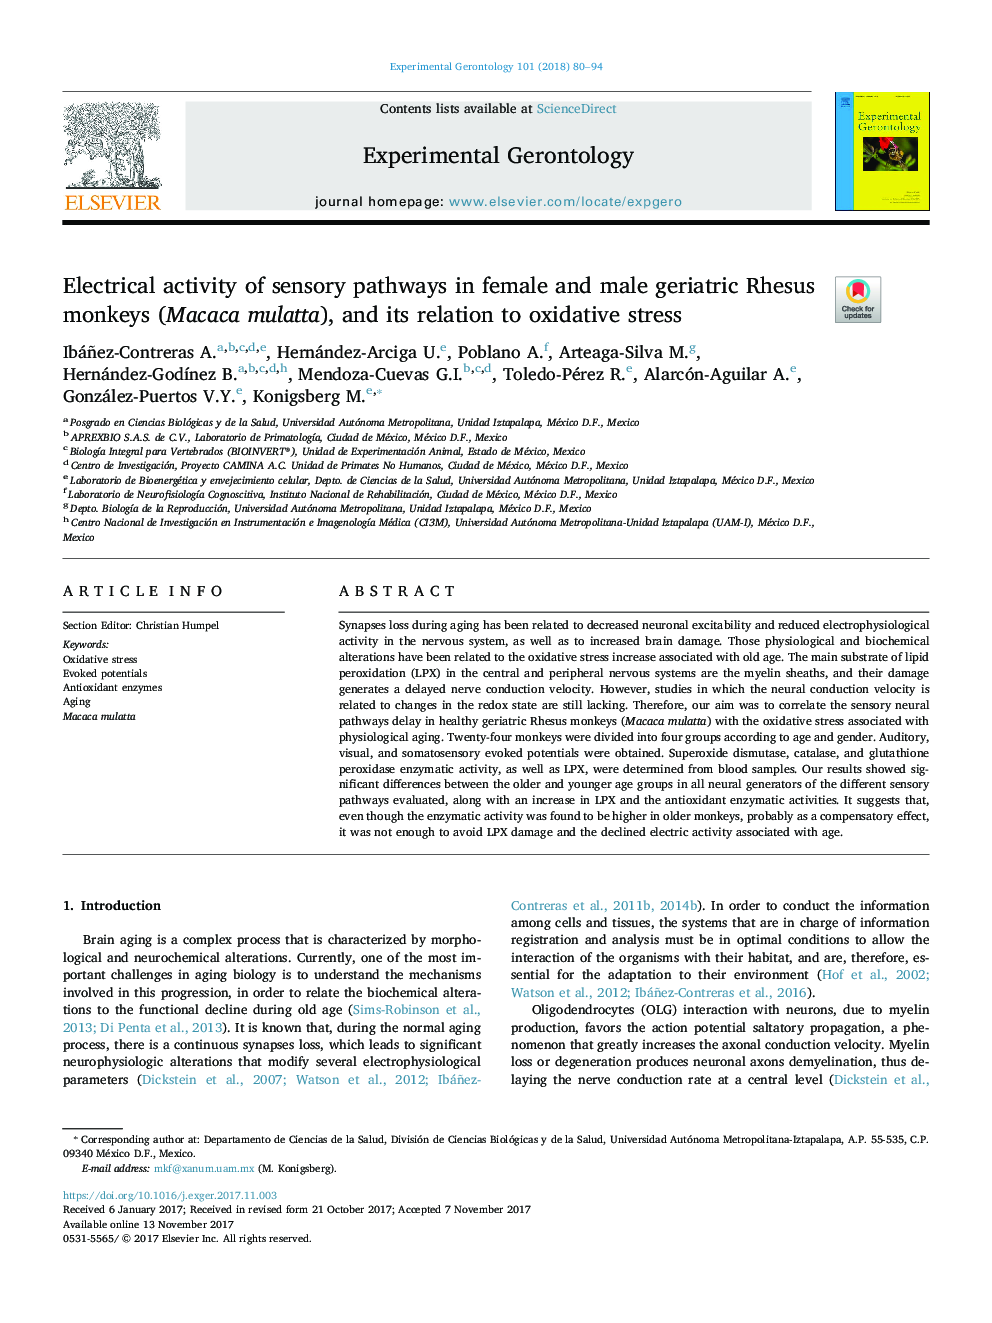 Electrical activity of sensory pathways in female and male geriatric Rhesus monkeys (Macaca mulatta), and its relation to oxidative stress